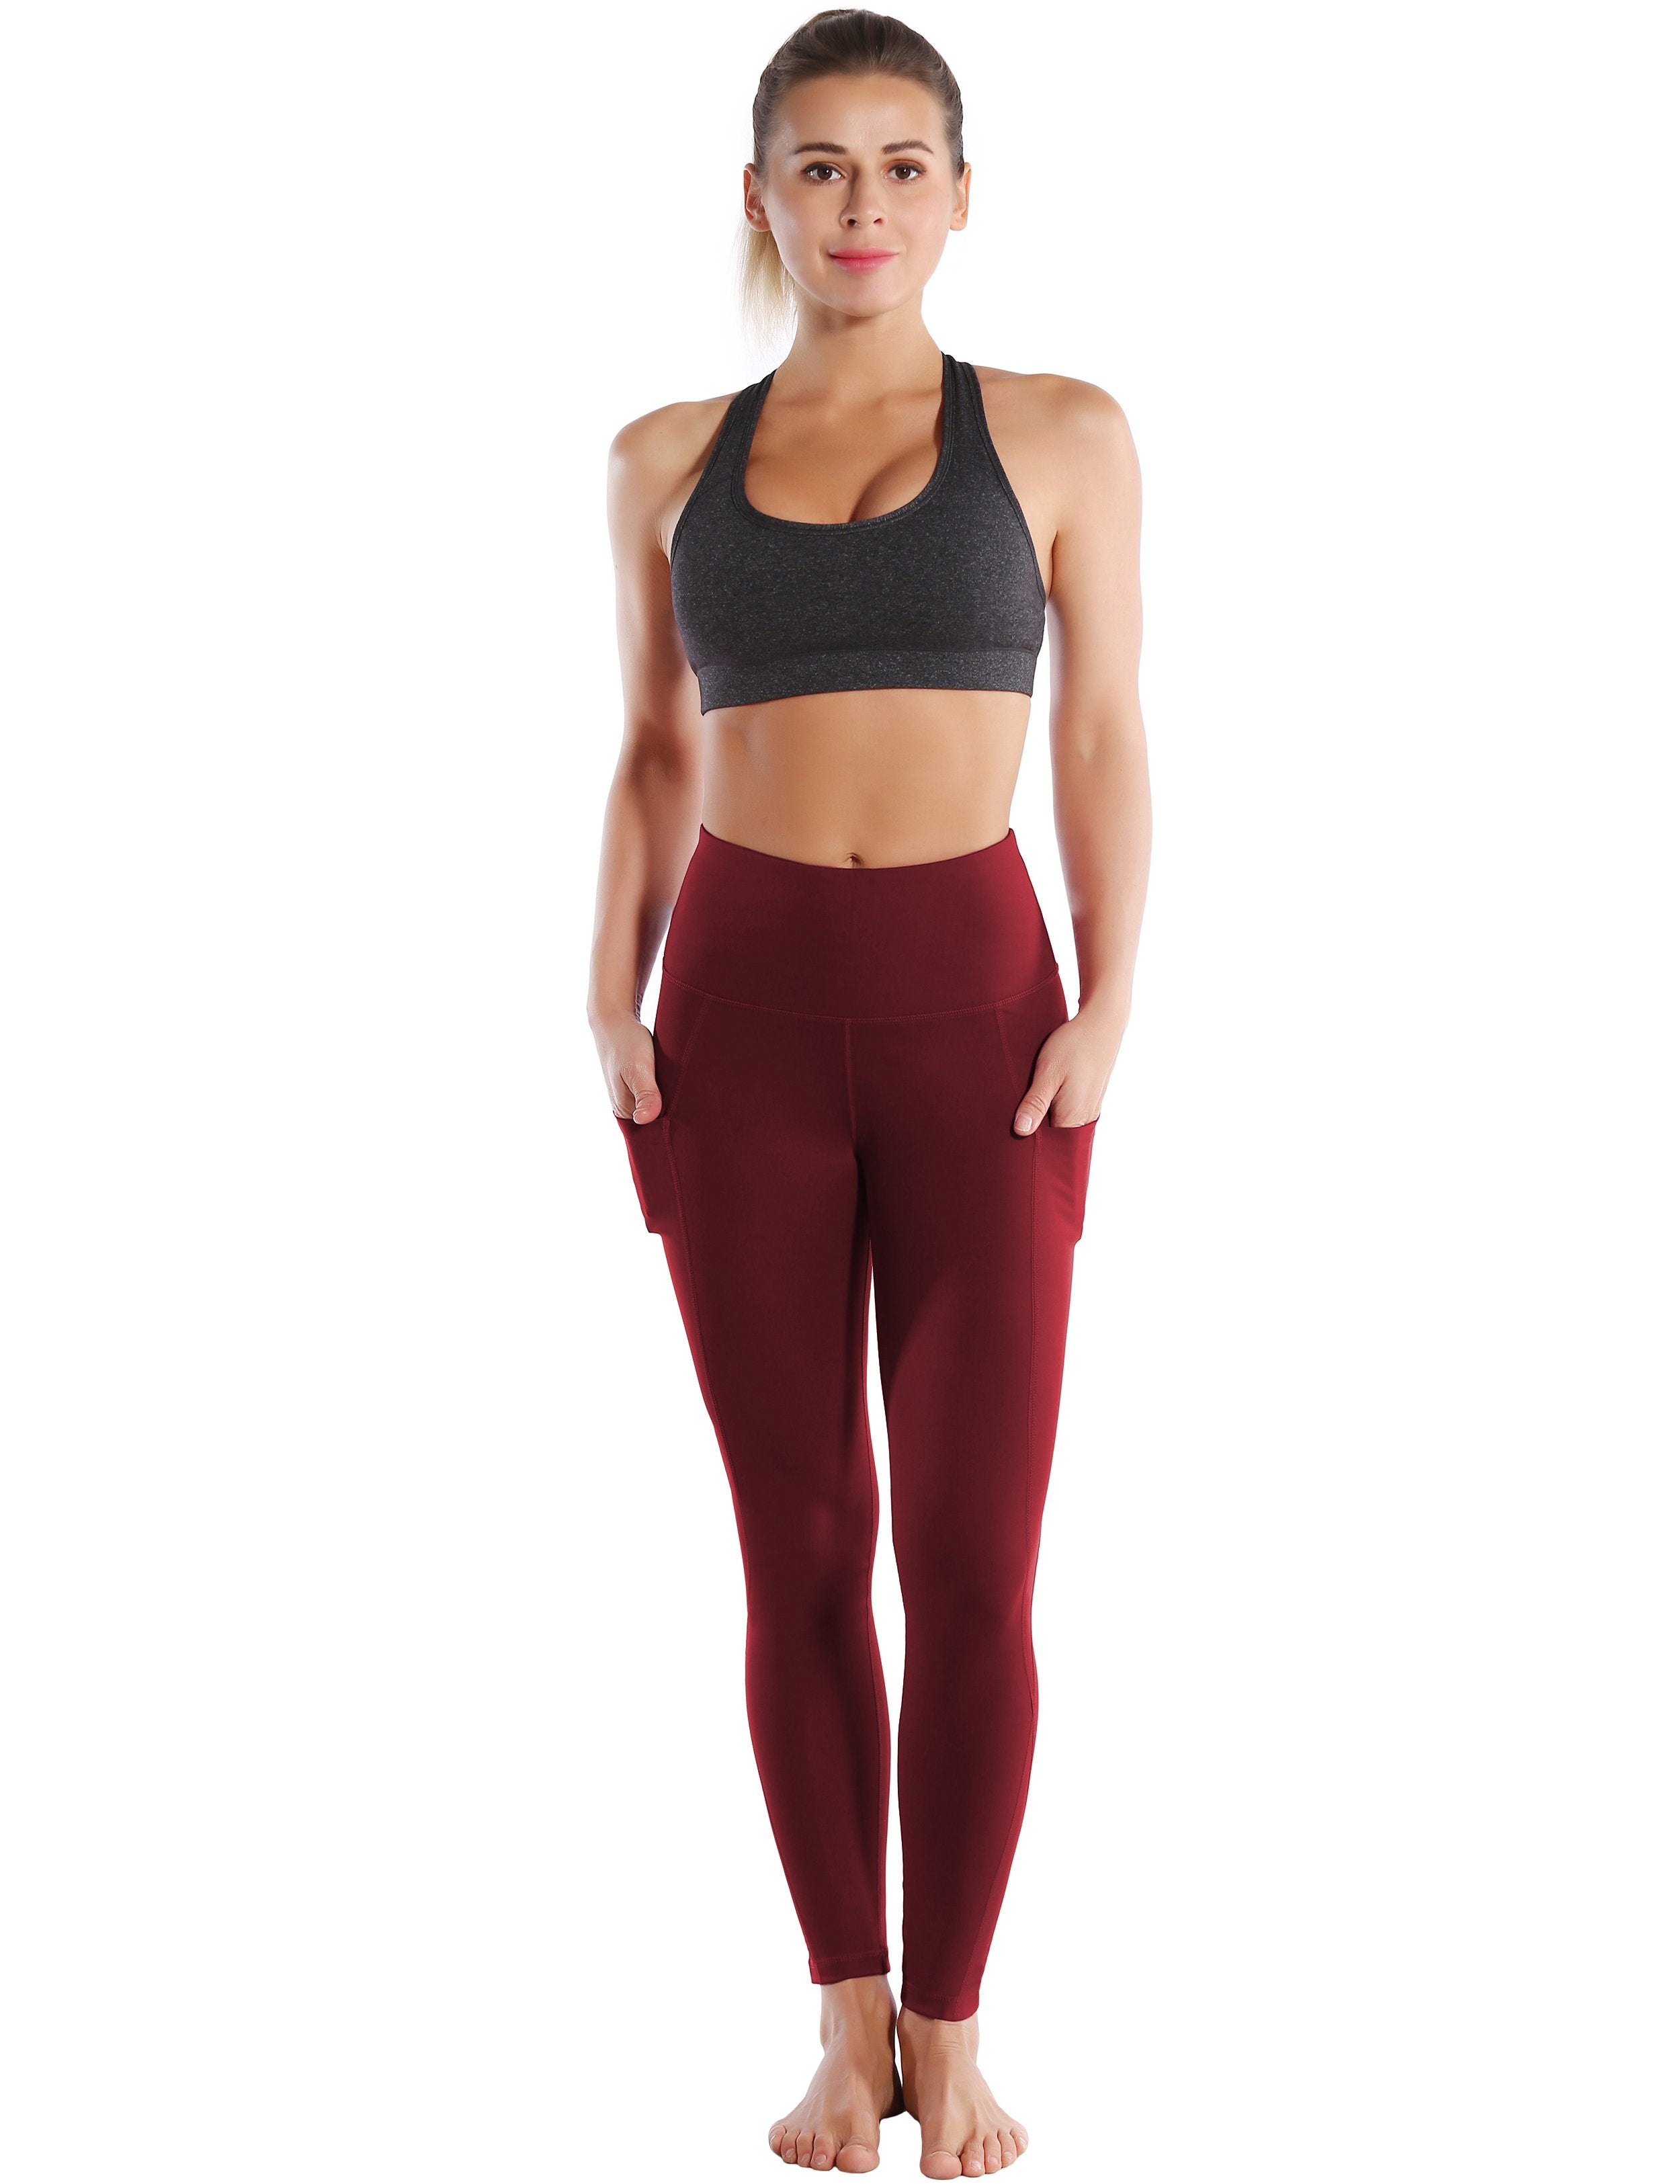 High Waist Side Pockets Gym Pants cherryred 75% Nylon, 25% Spandex Fabric doesn't attract lint easily 4-way stretch No see-through Moisture-wicking Tummy control Inner pocket